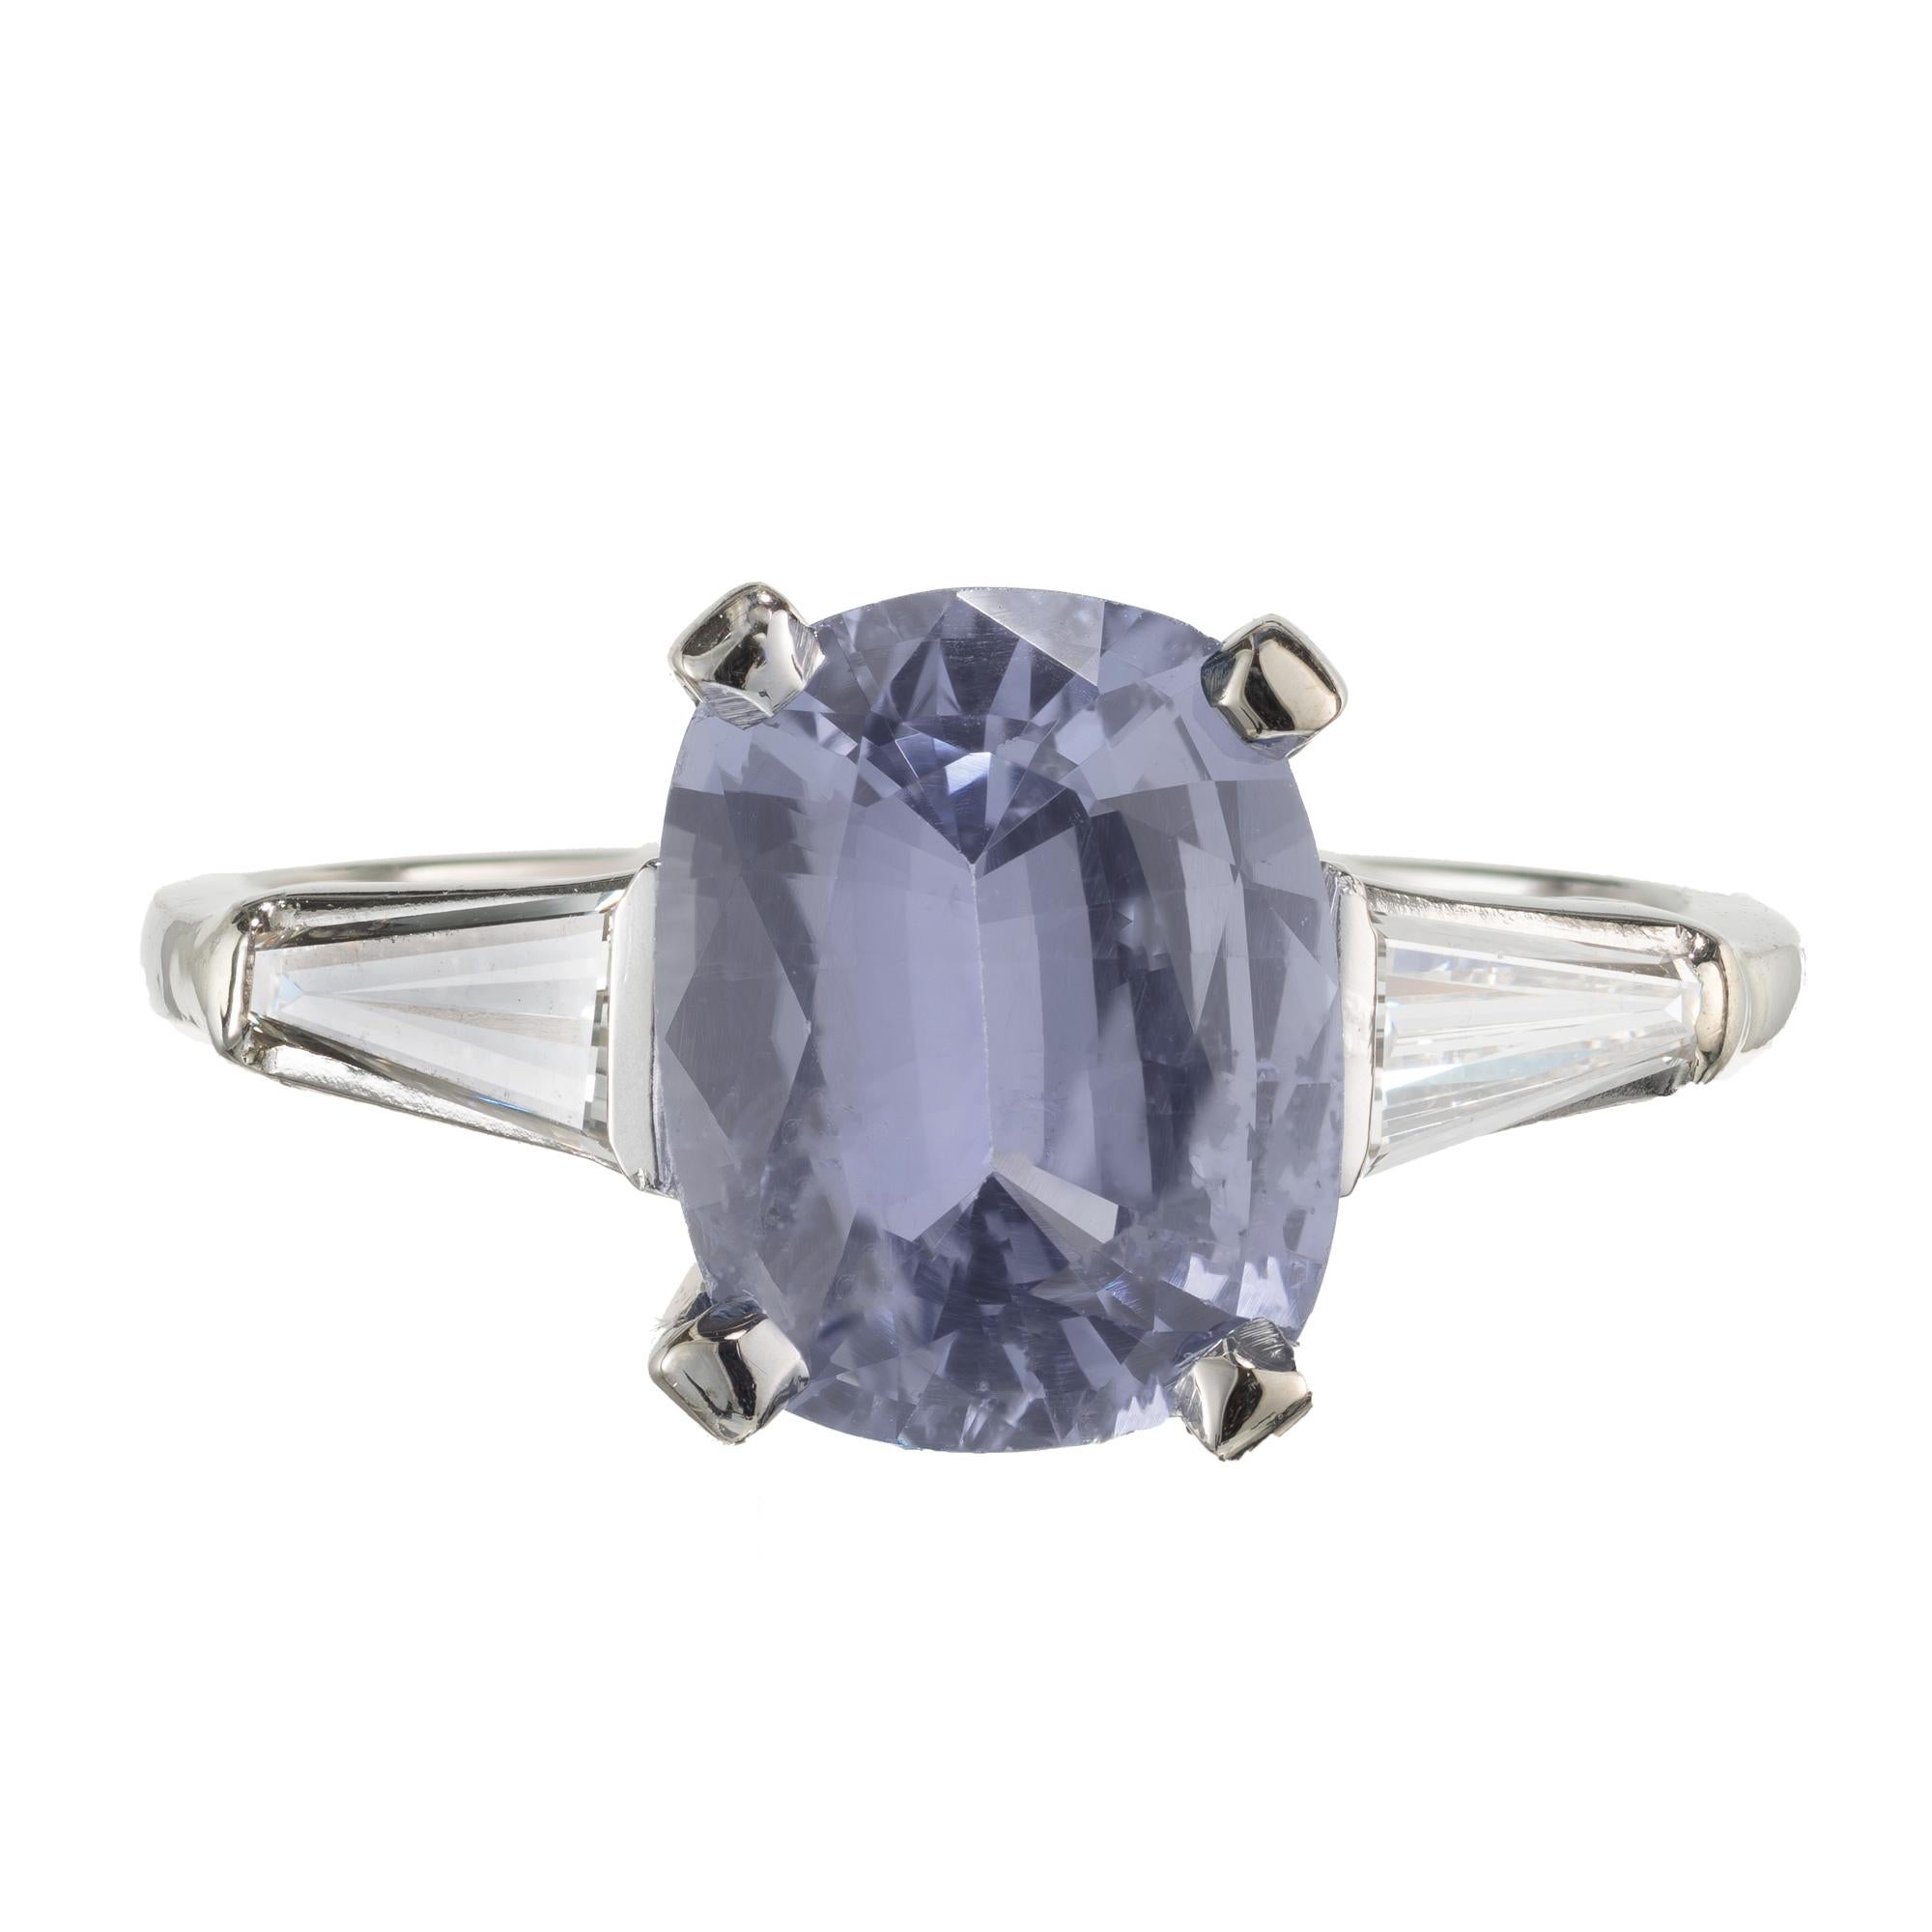 Late Art Deco Light to medium bright Ceylon blue oval 3.06ct cushion Sapphire and diamond three-stone engagement ring. Oval sapphire center stone, with two tapered baguette side diamonds in a platinum setting.  GIA certified. 

1 natural 3.06ct oval